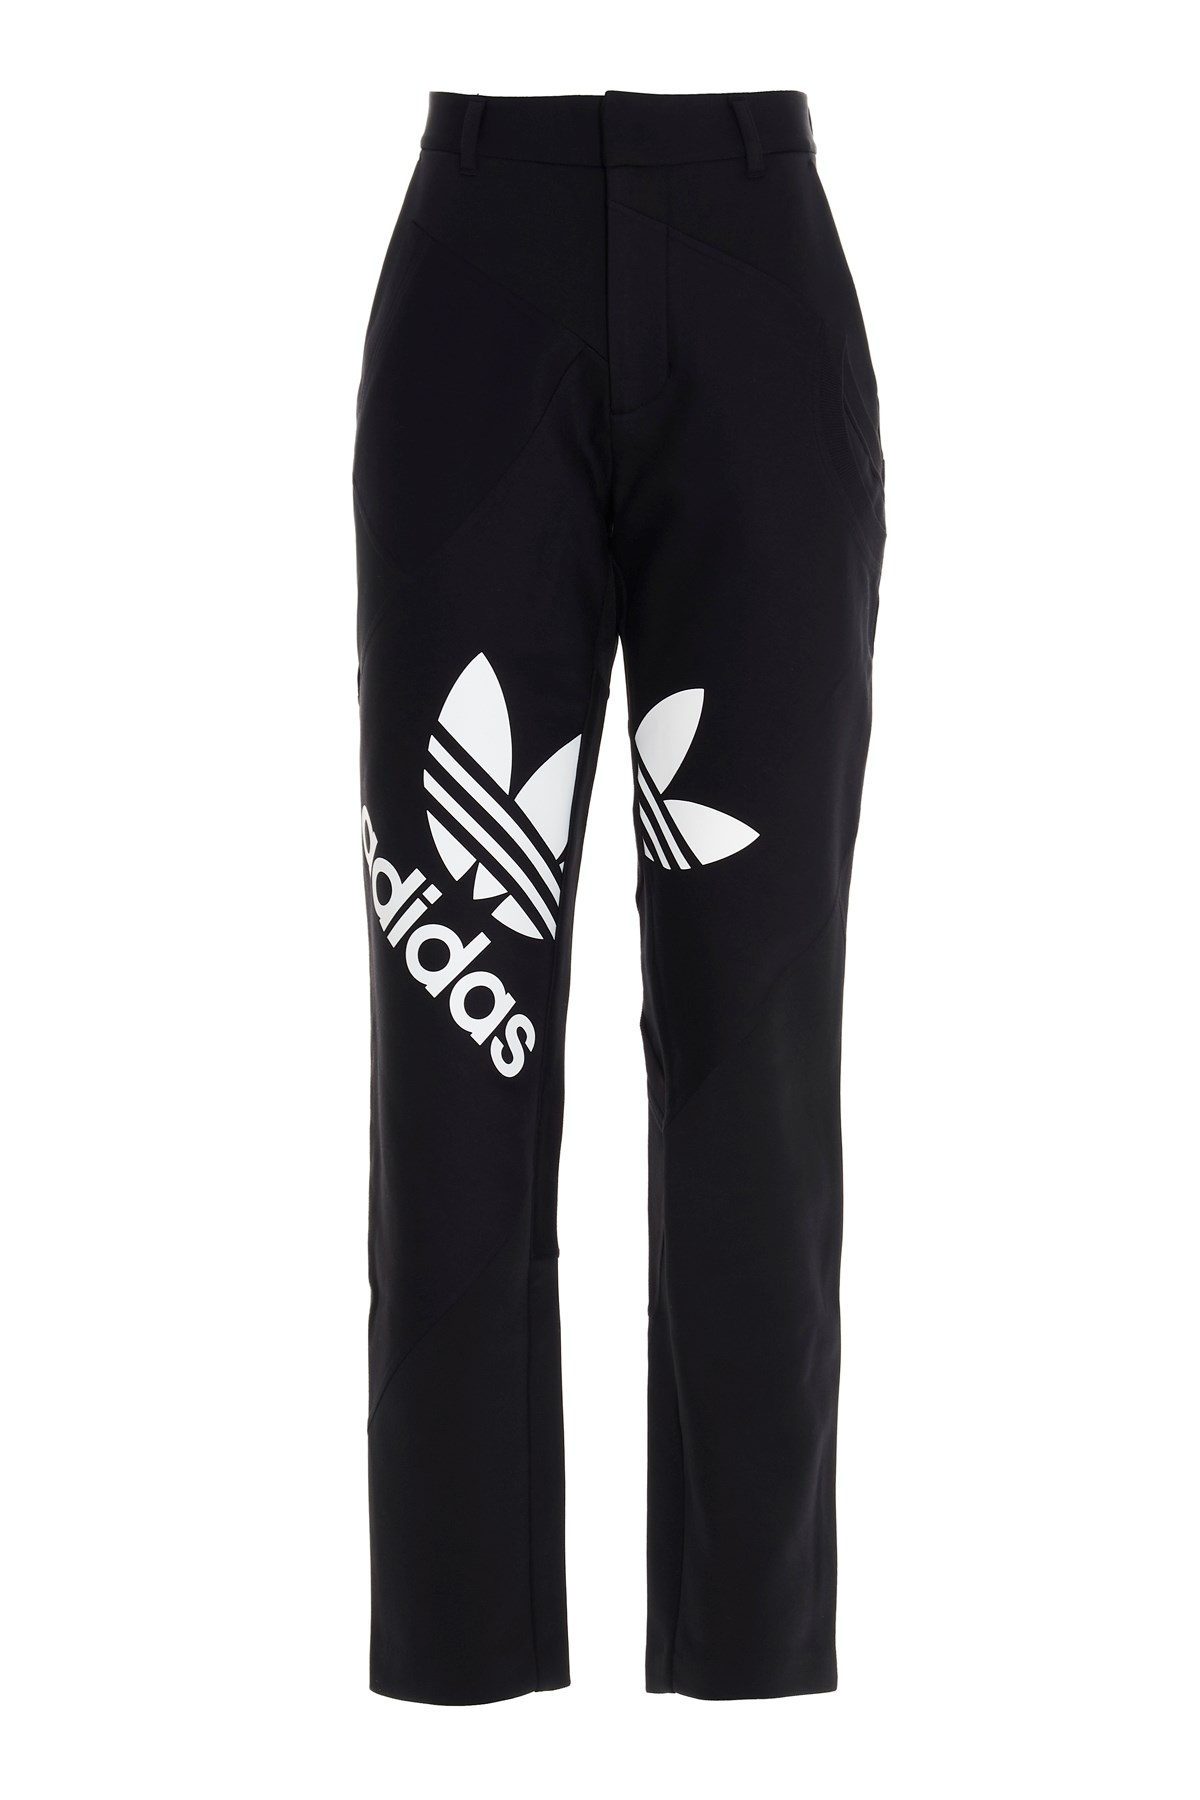 ADIDAS ORIGINALS Adidas X Dry Clean Only Trousers